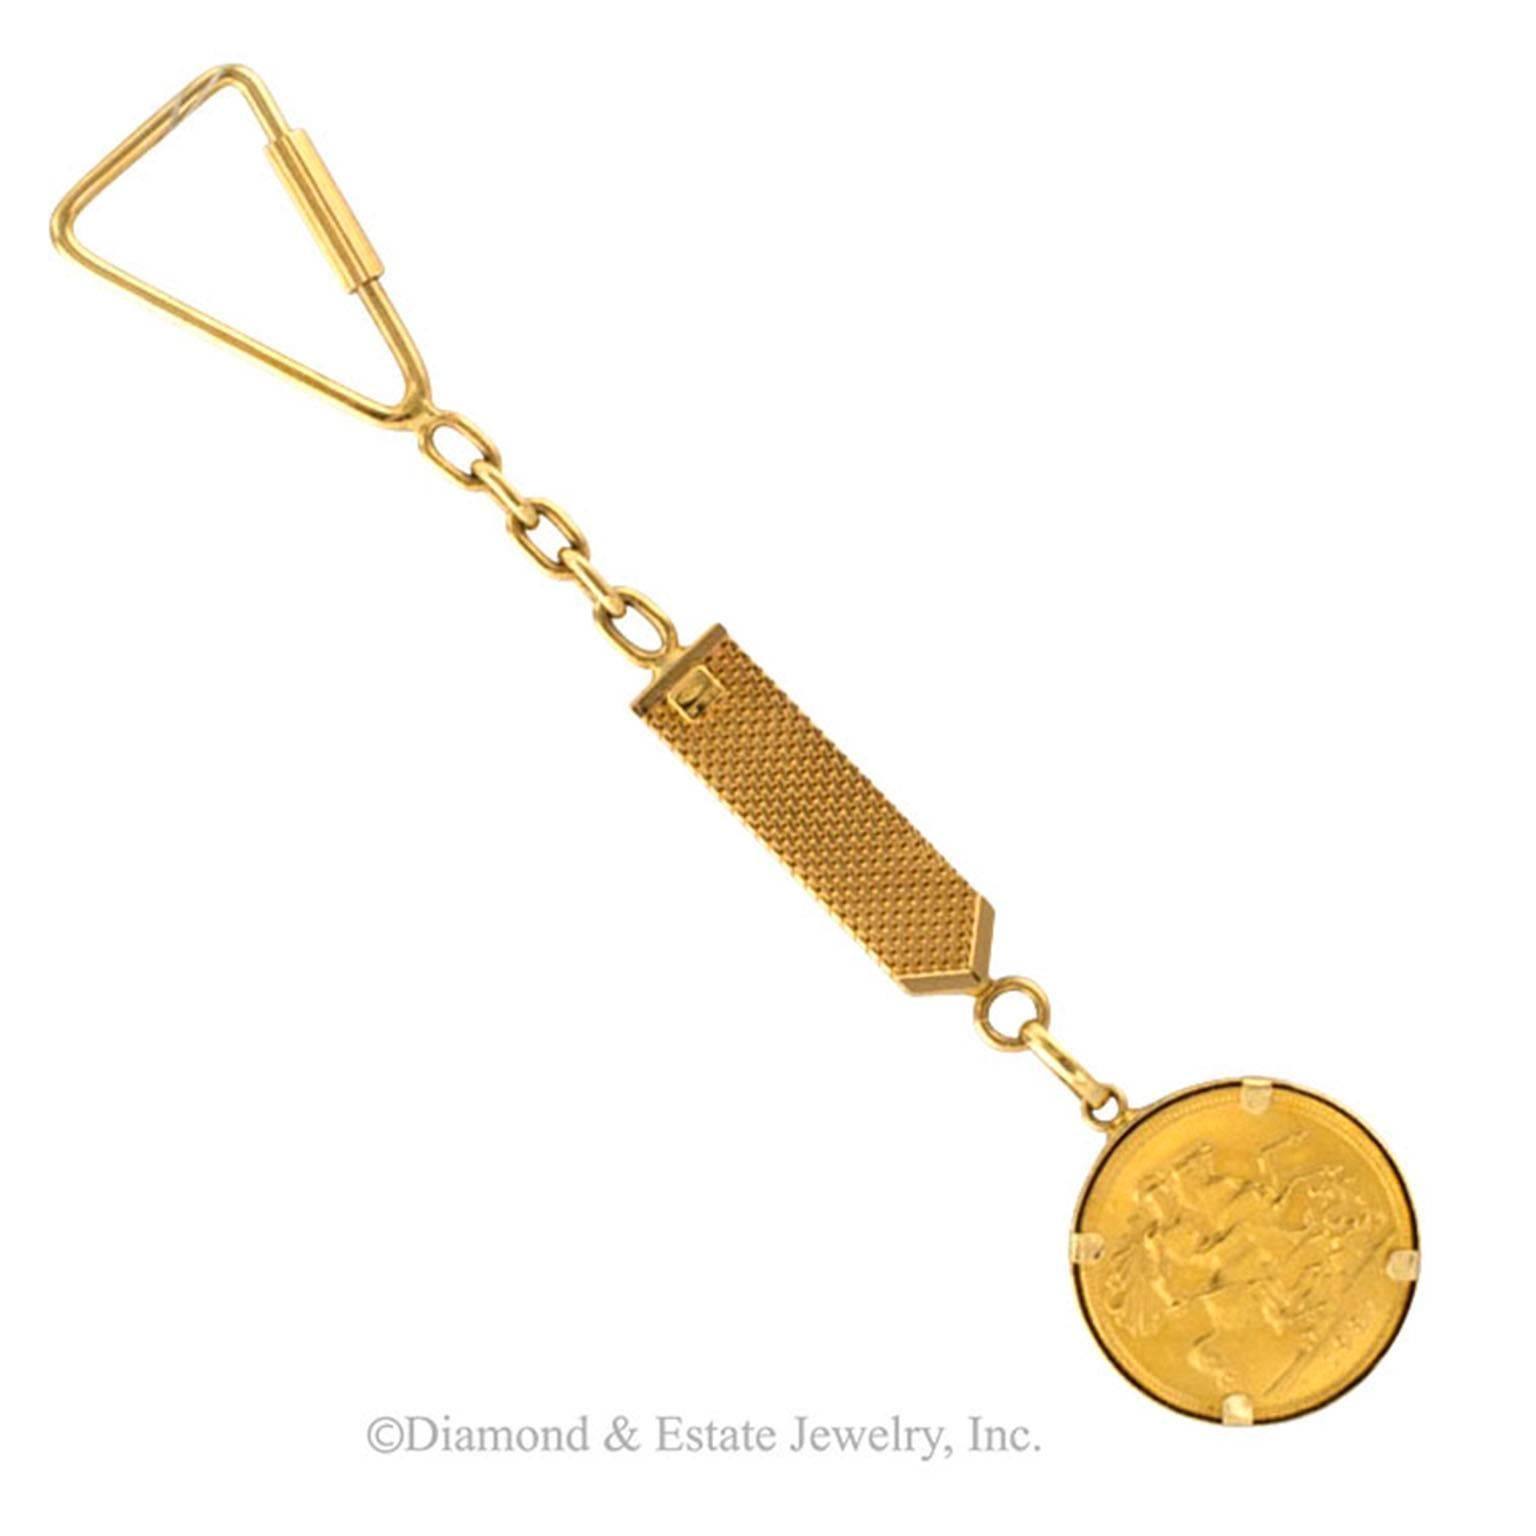 English Sovereign and 18 Karat Gold Key Chain Fob

Handsome and extremely useful, luxurious, for sure.  How nice is having an 18 karat gold key chain fob?  Or how about a perfectly decadent gift for someone who... "has Everything!!!"  